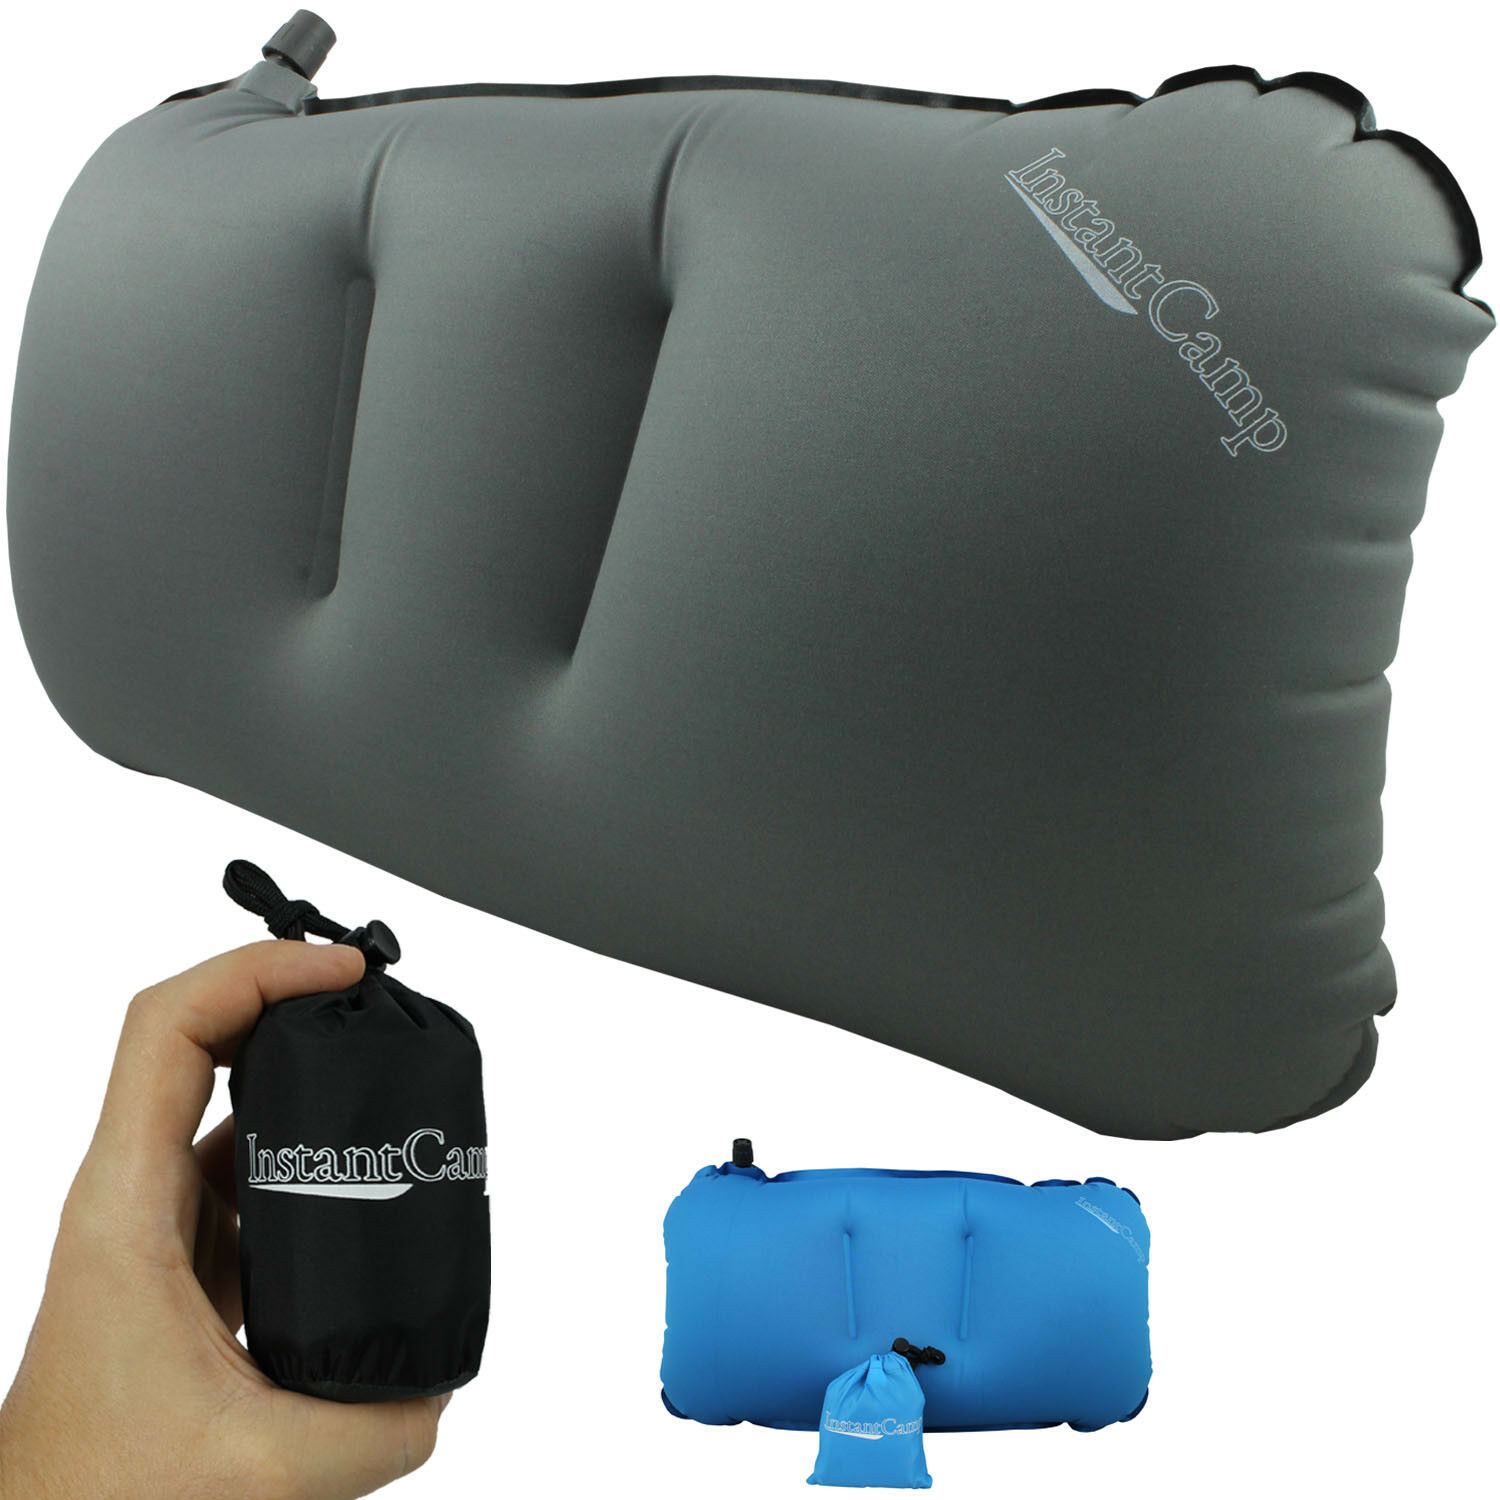 Instantcamptm Lightweight "cloud" Camping Backpacking Hiking Pillow - Inflatable